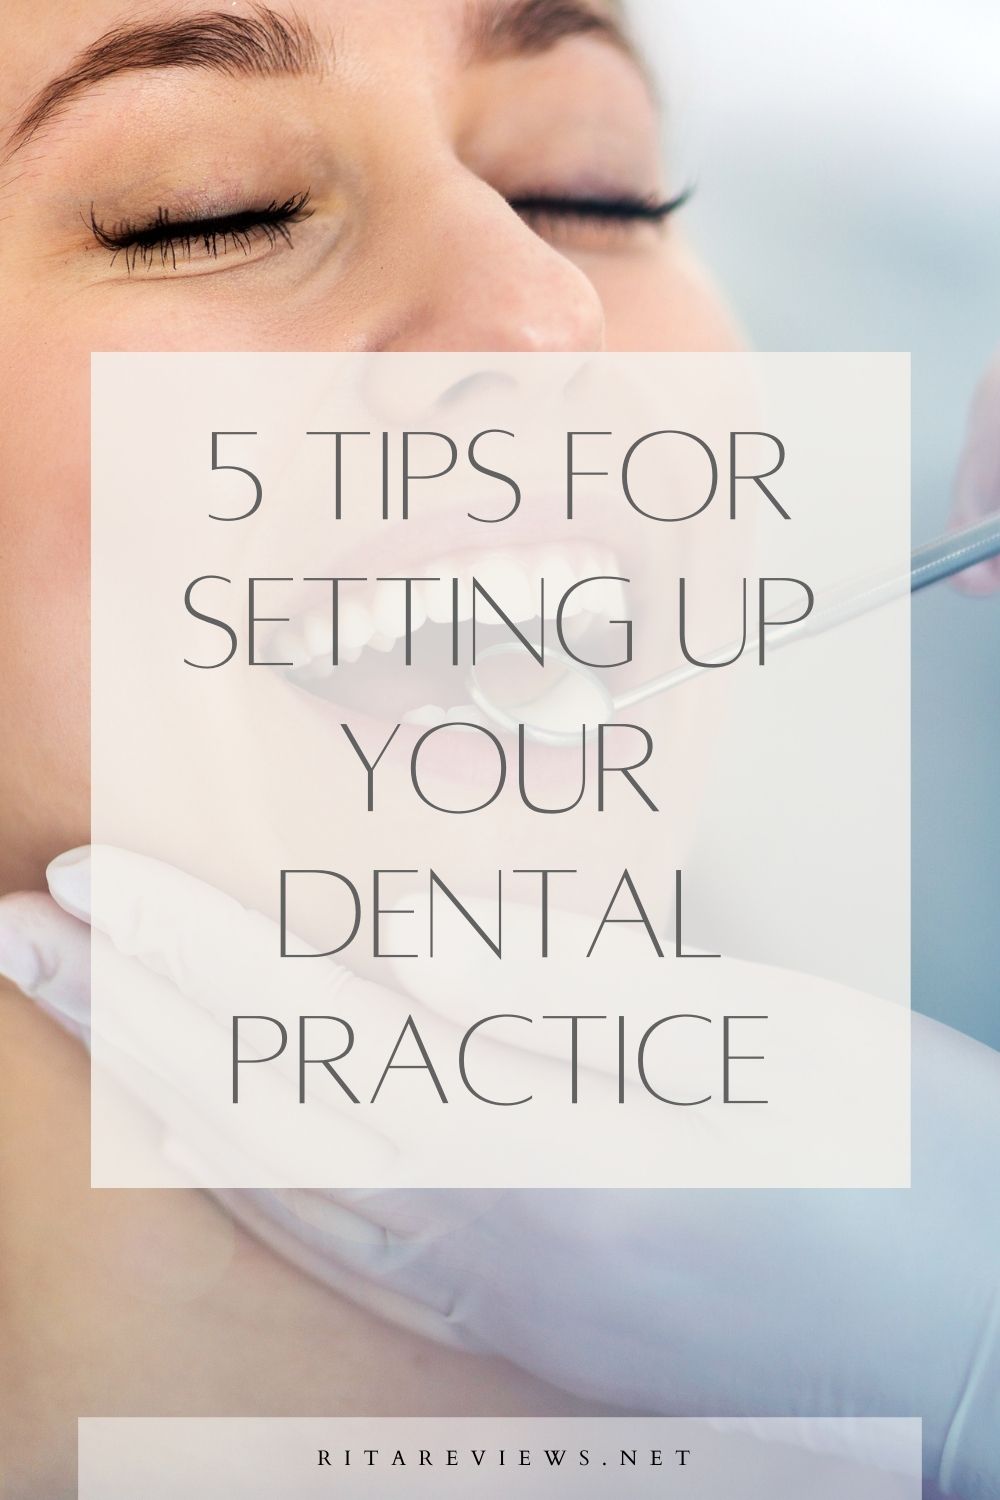 5 Tips for Setting Up Your Dental Practice